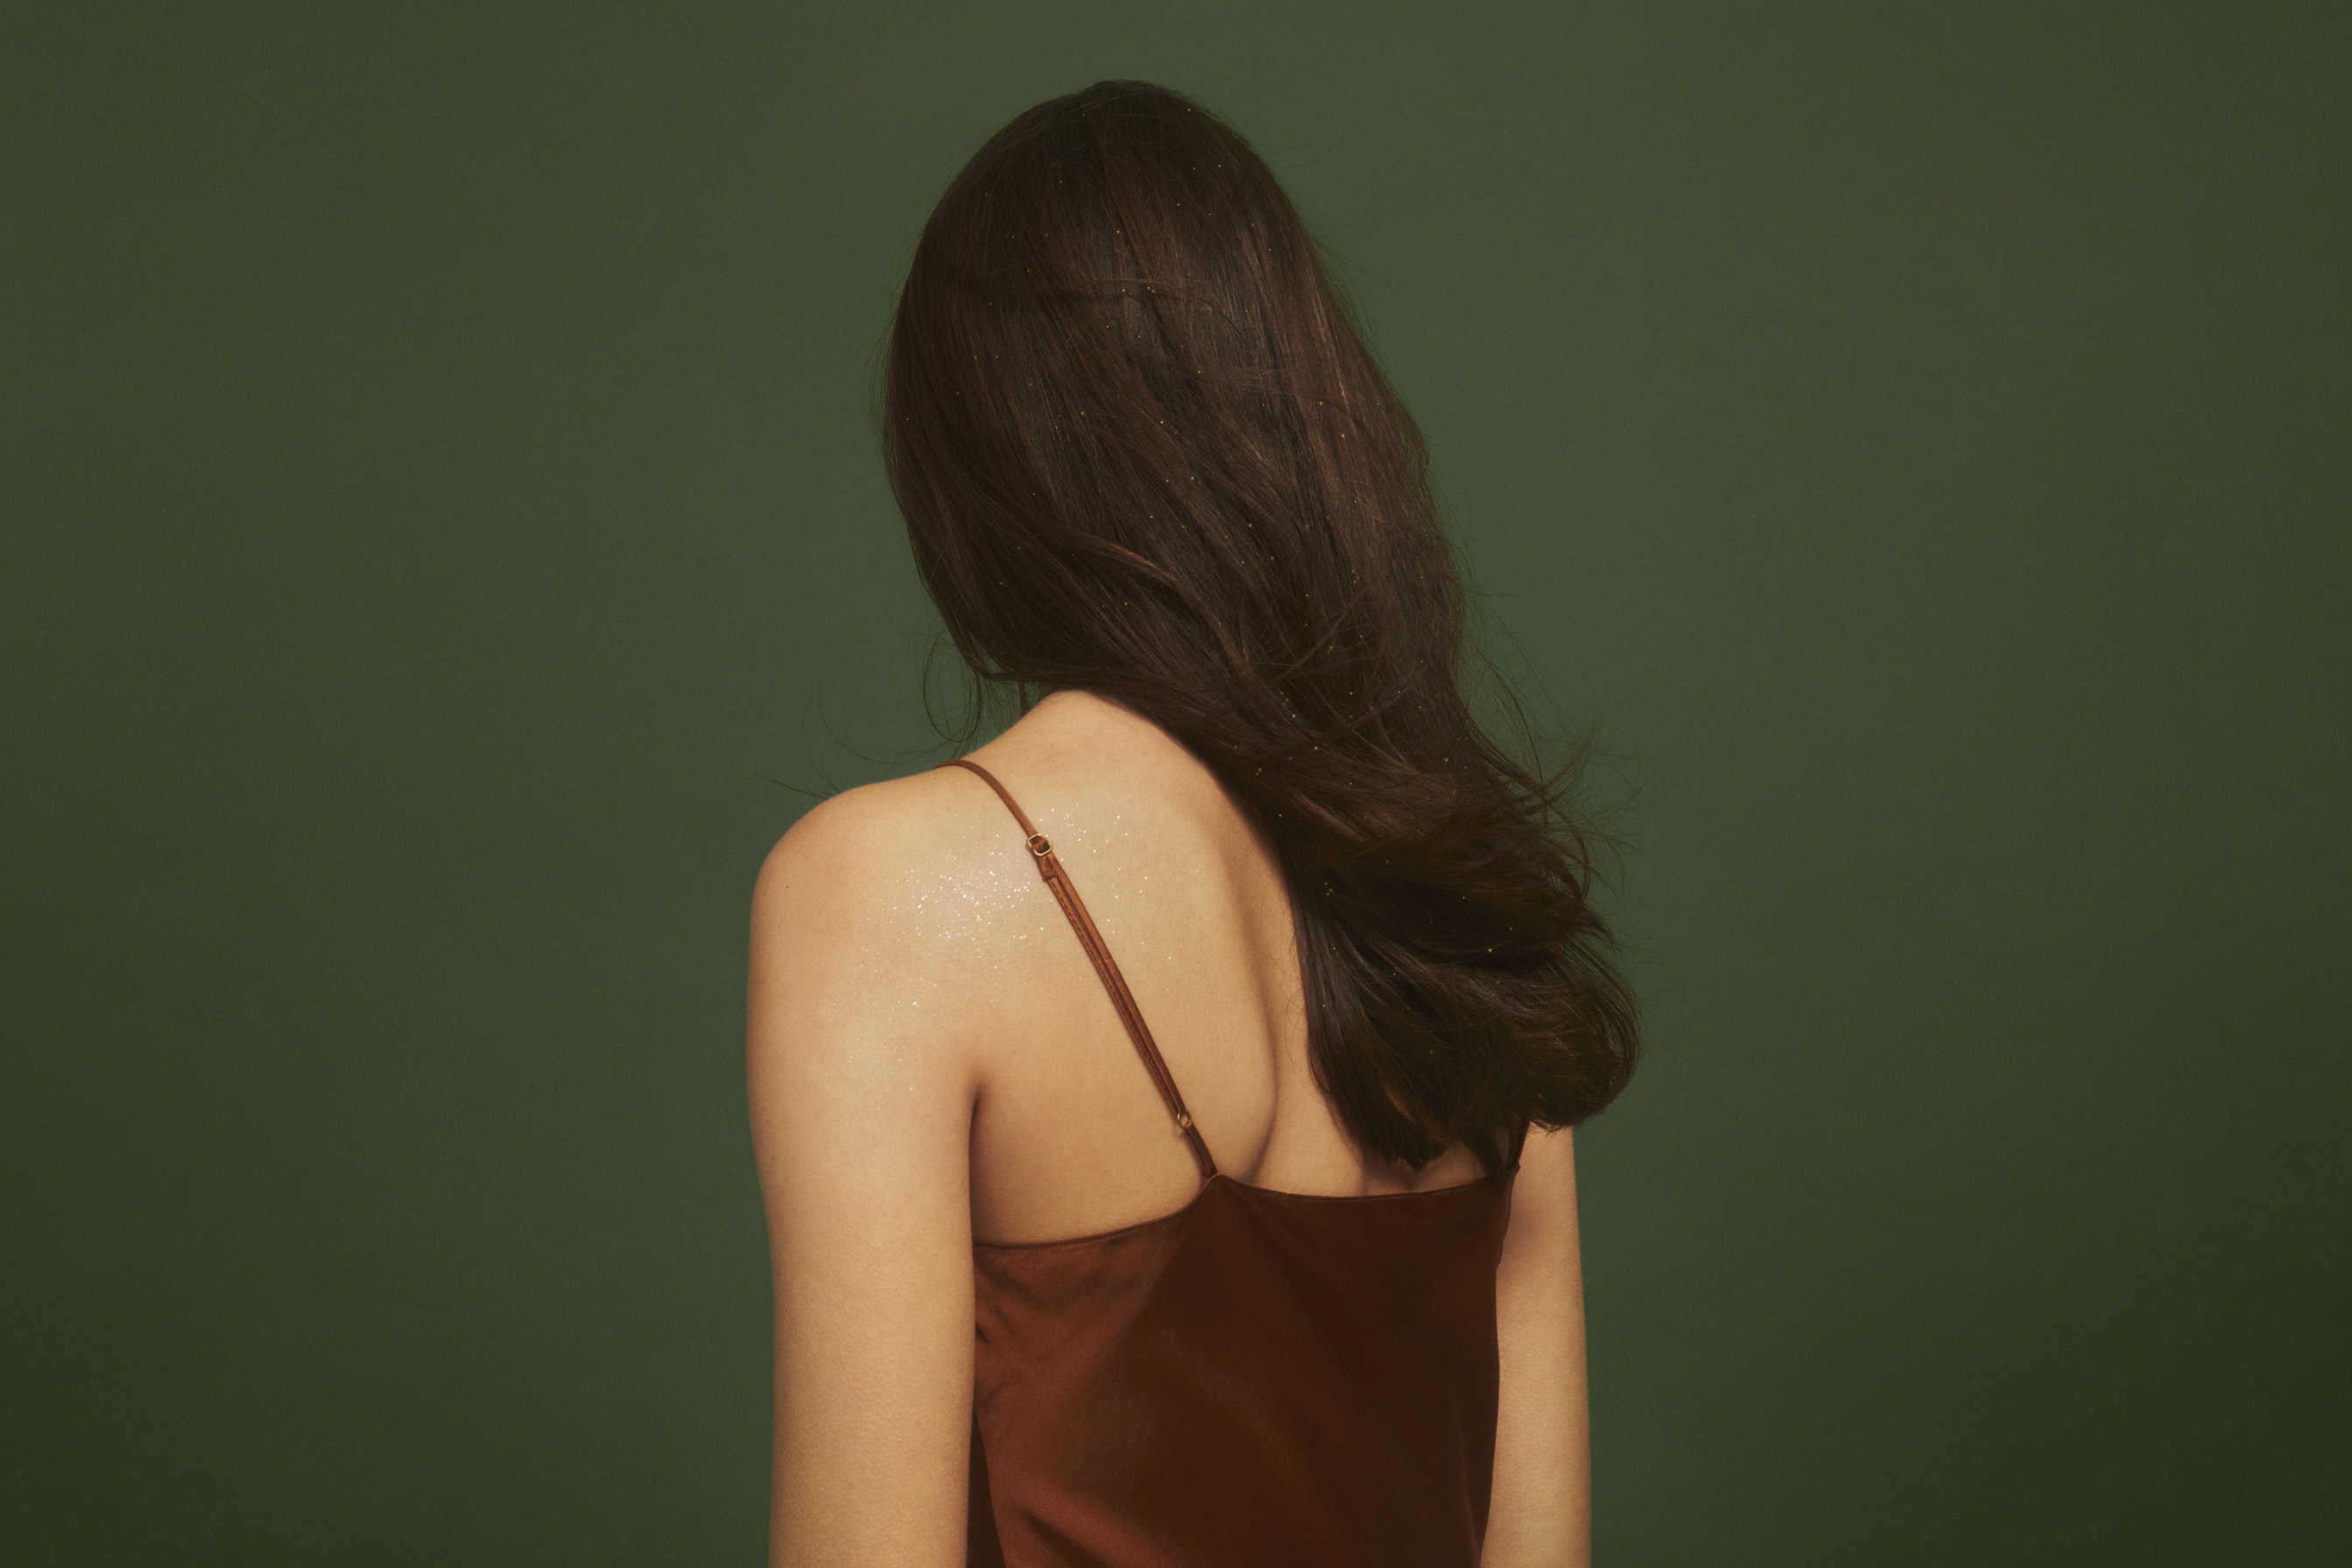 woman with long, brown hair stands against a dark, green backgorund